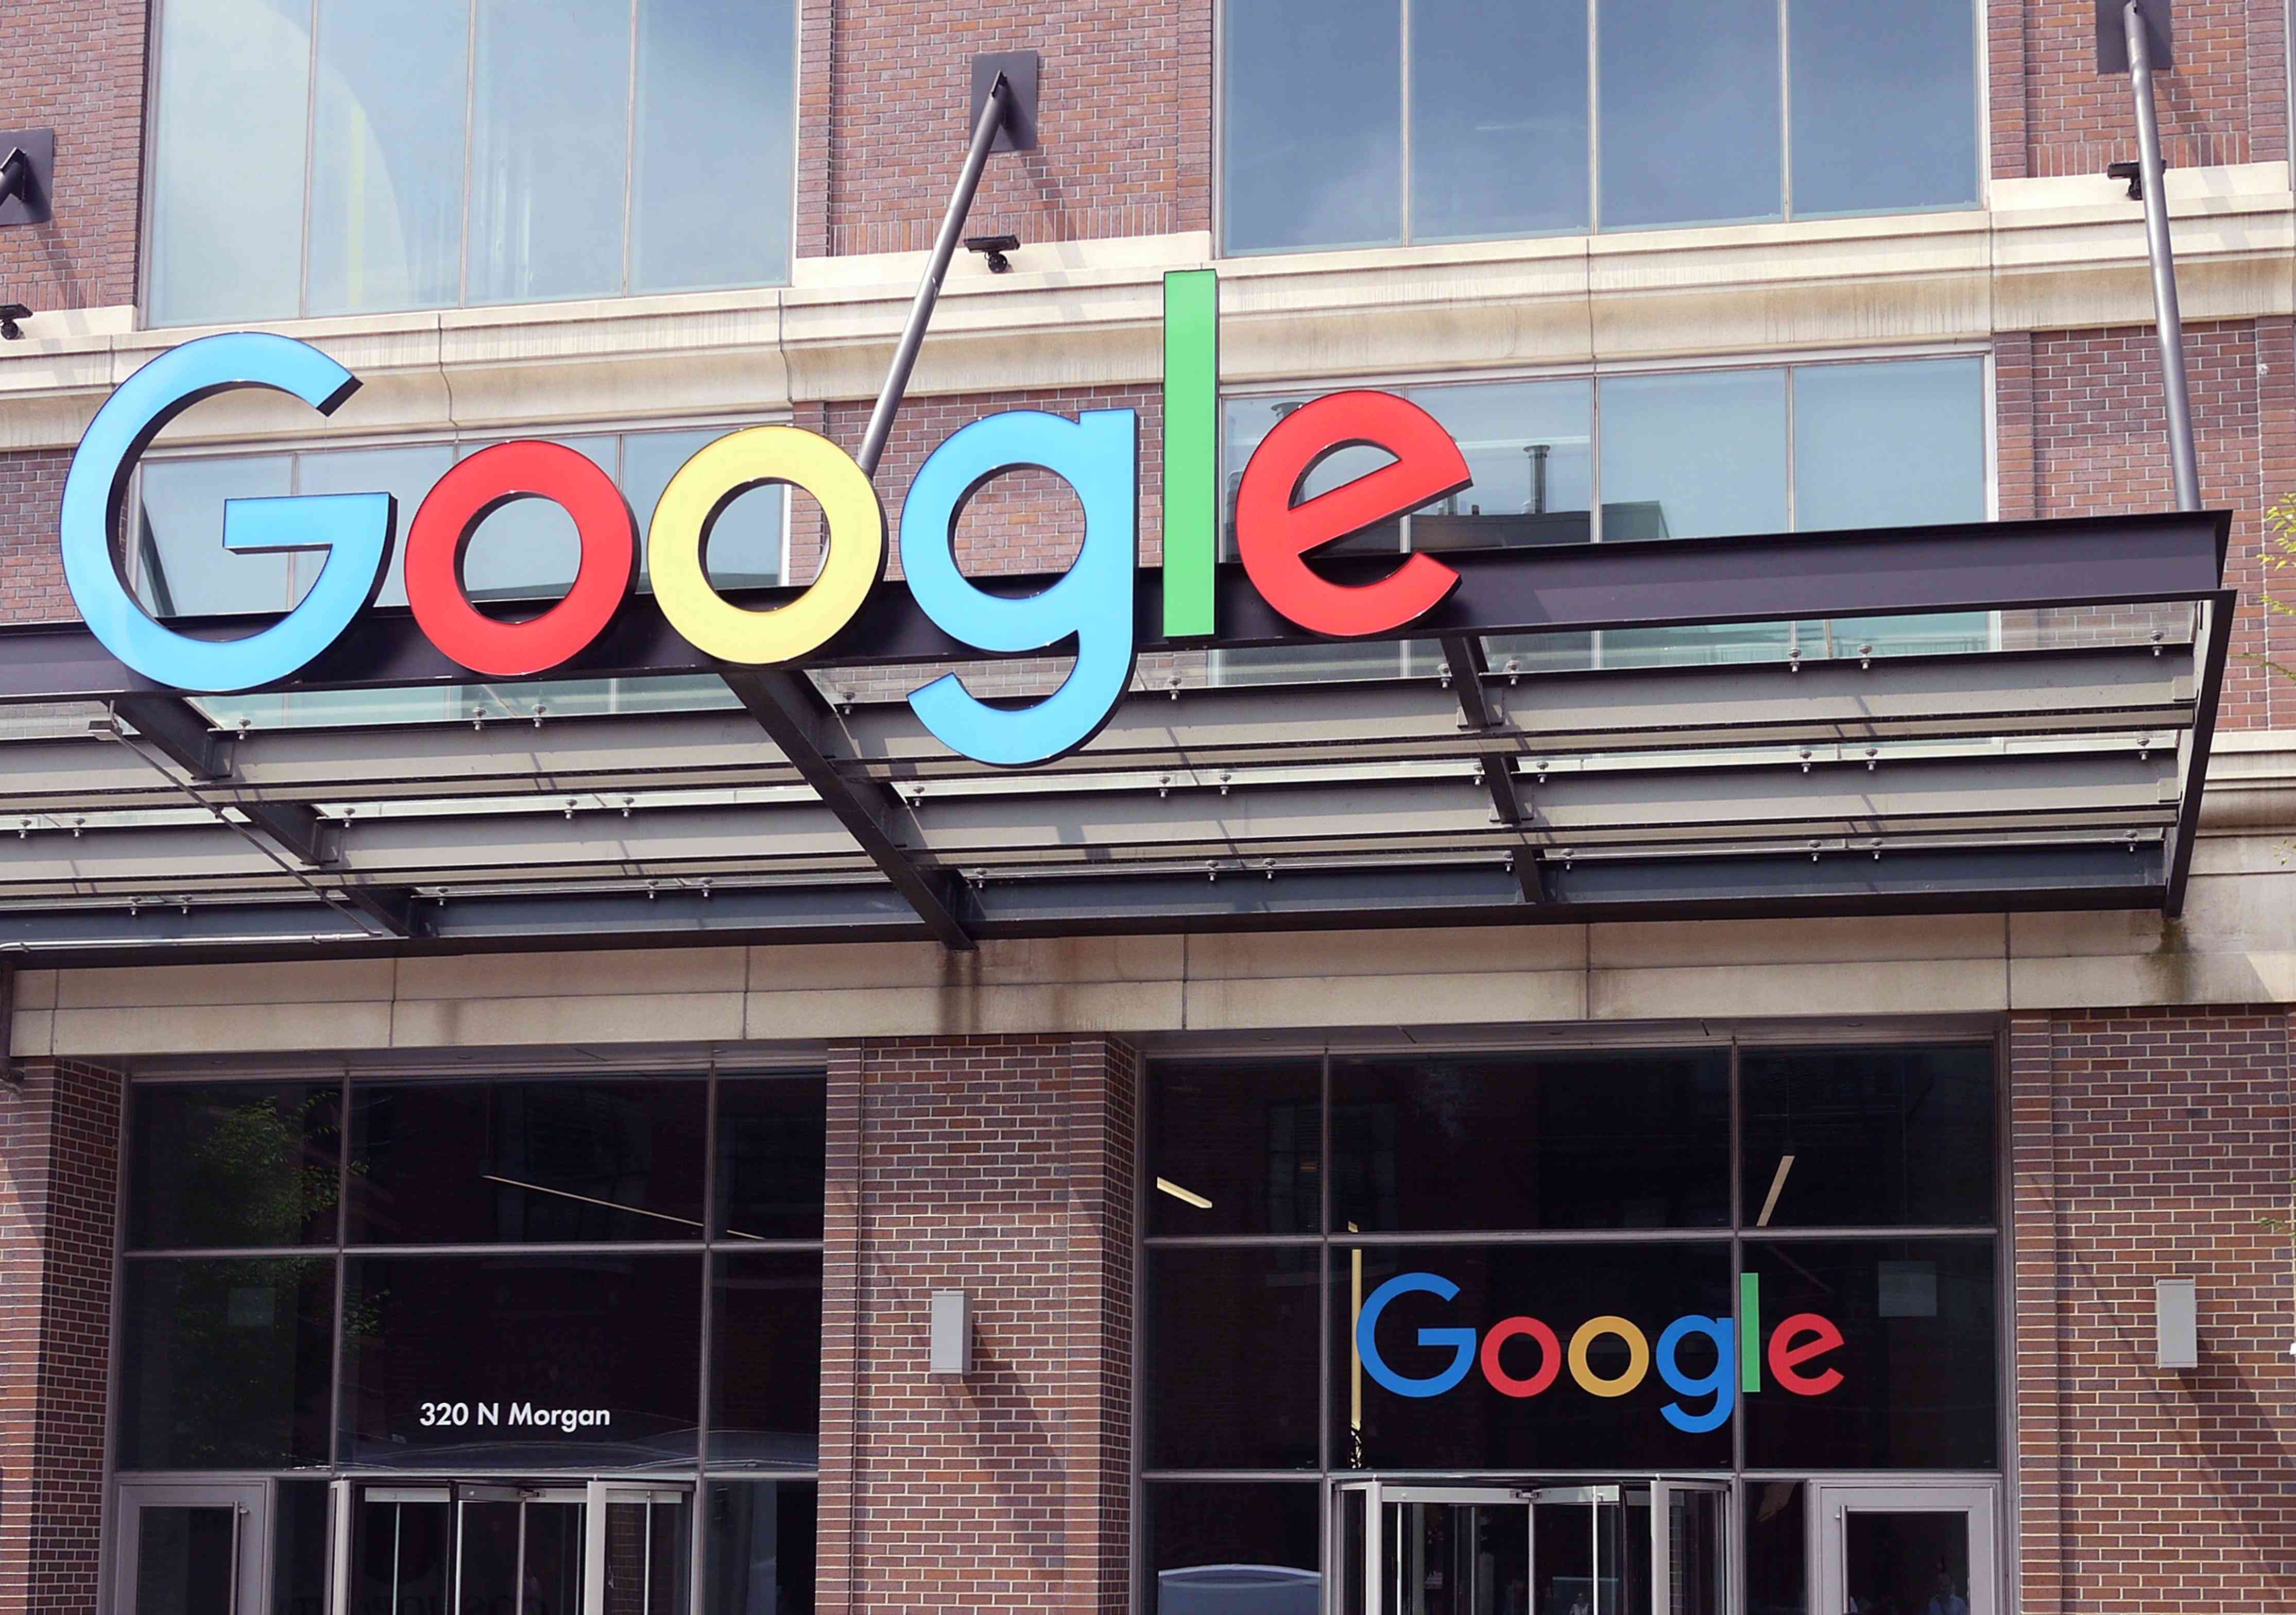 Google company logo on the awning of a building (at 320 North Morgan Street) in the West Loop neighborhood, Chicago, Illinois, April 2018.